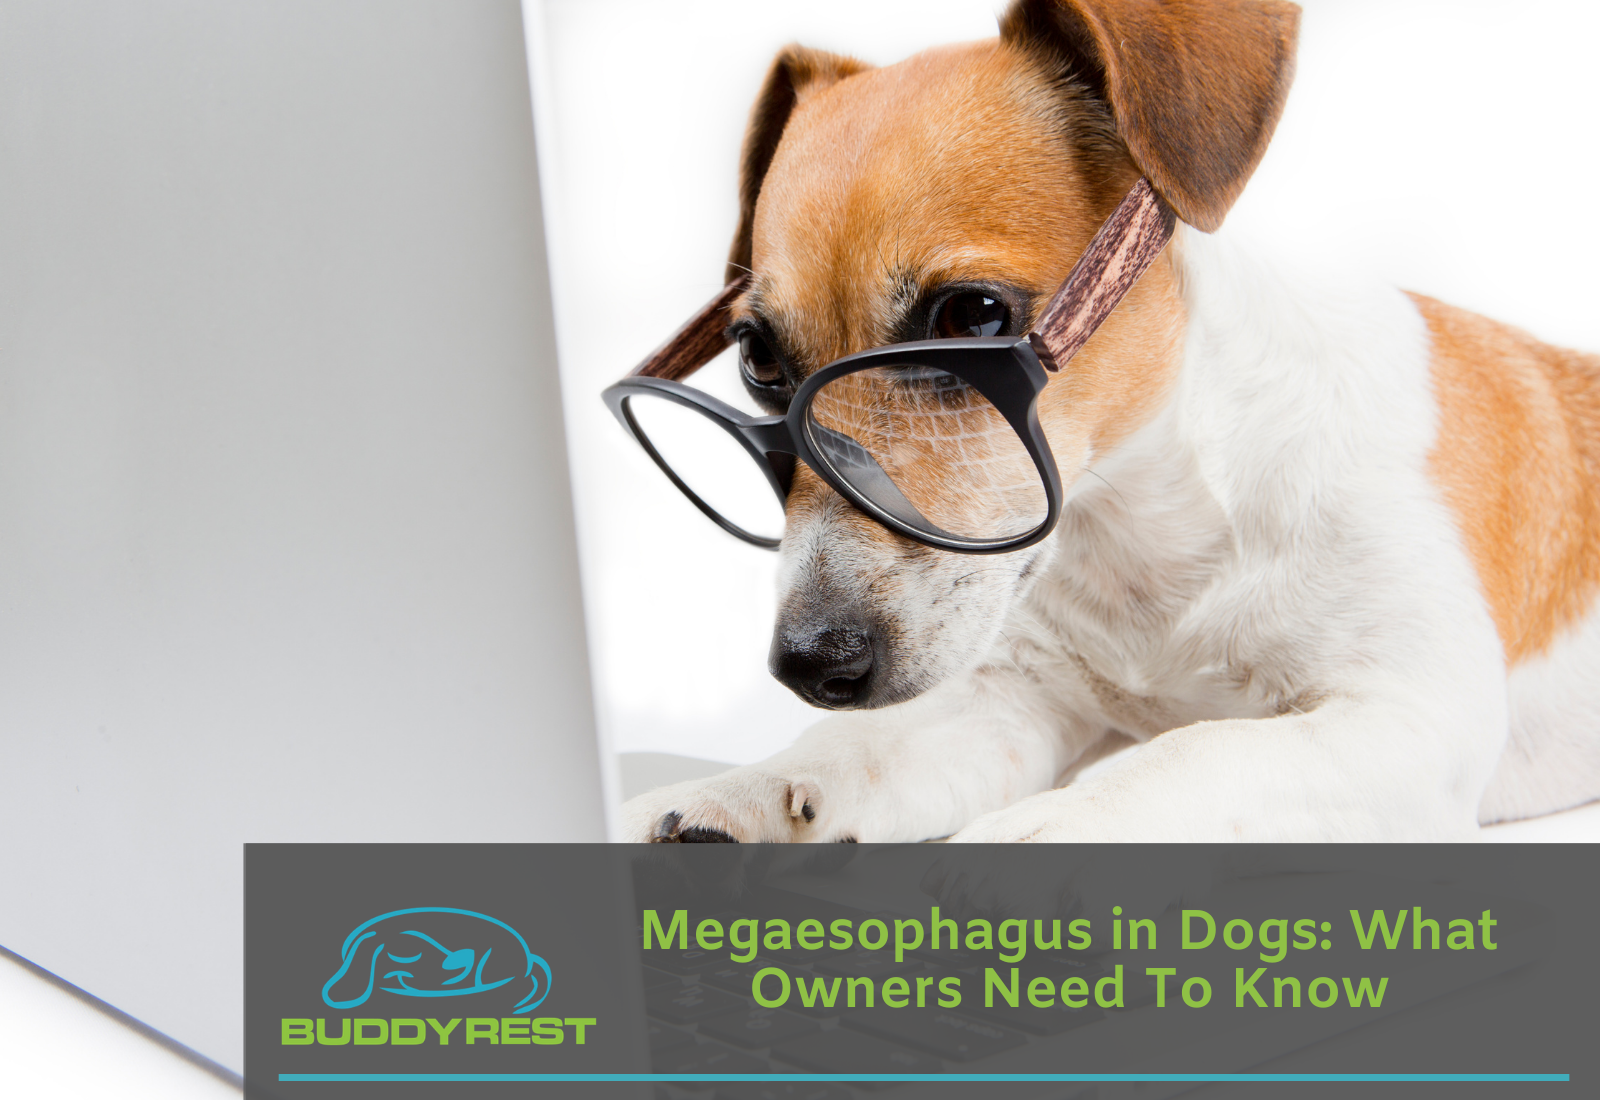 how can i help my dog with megaesophagus